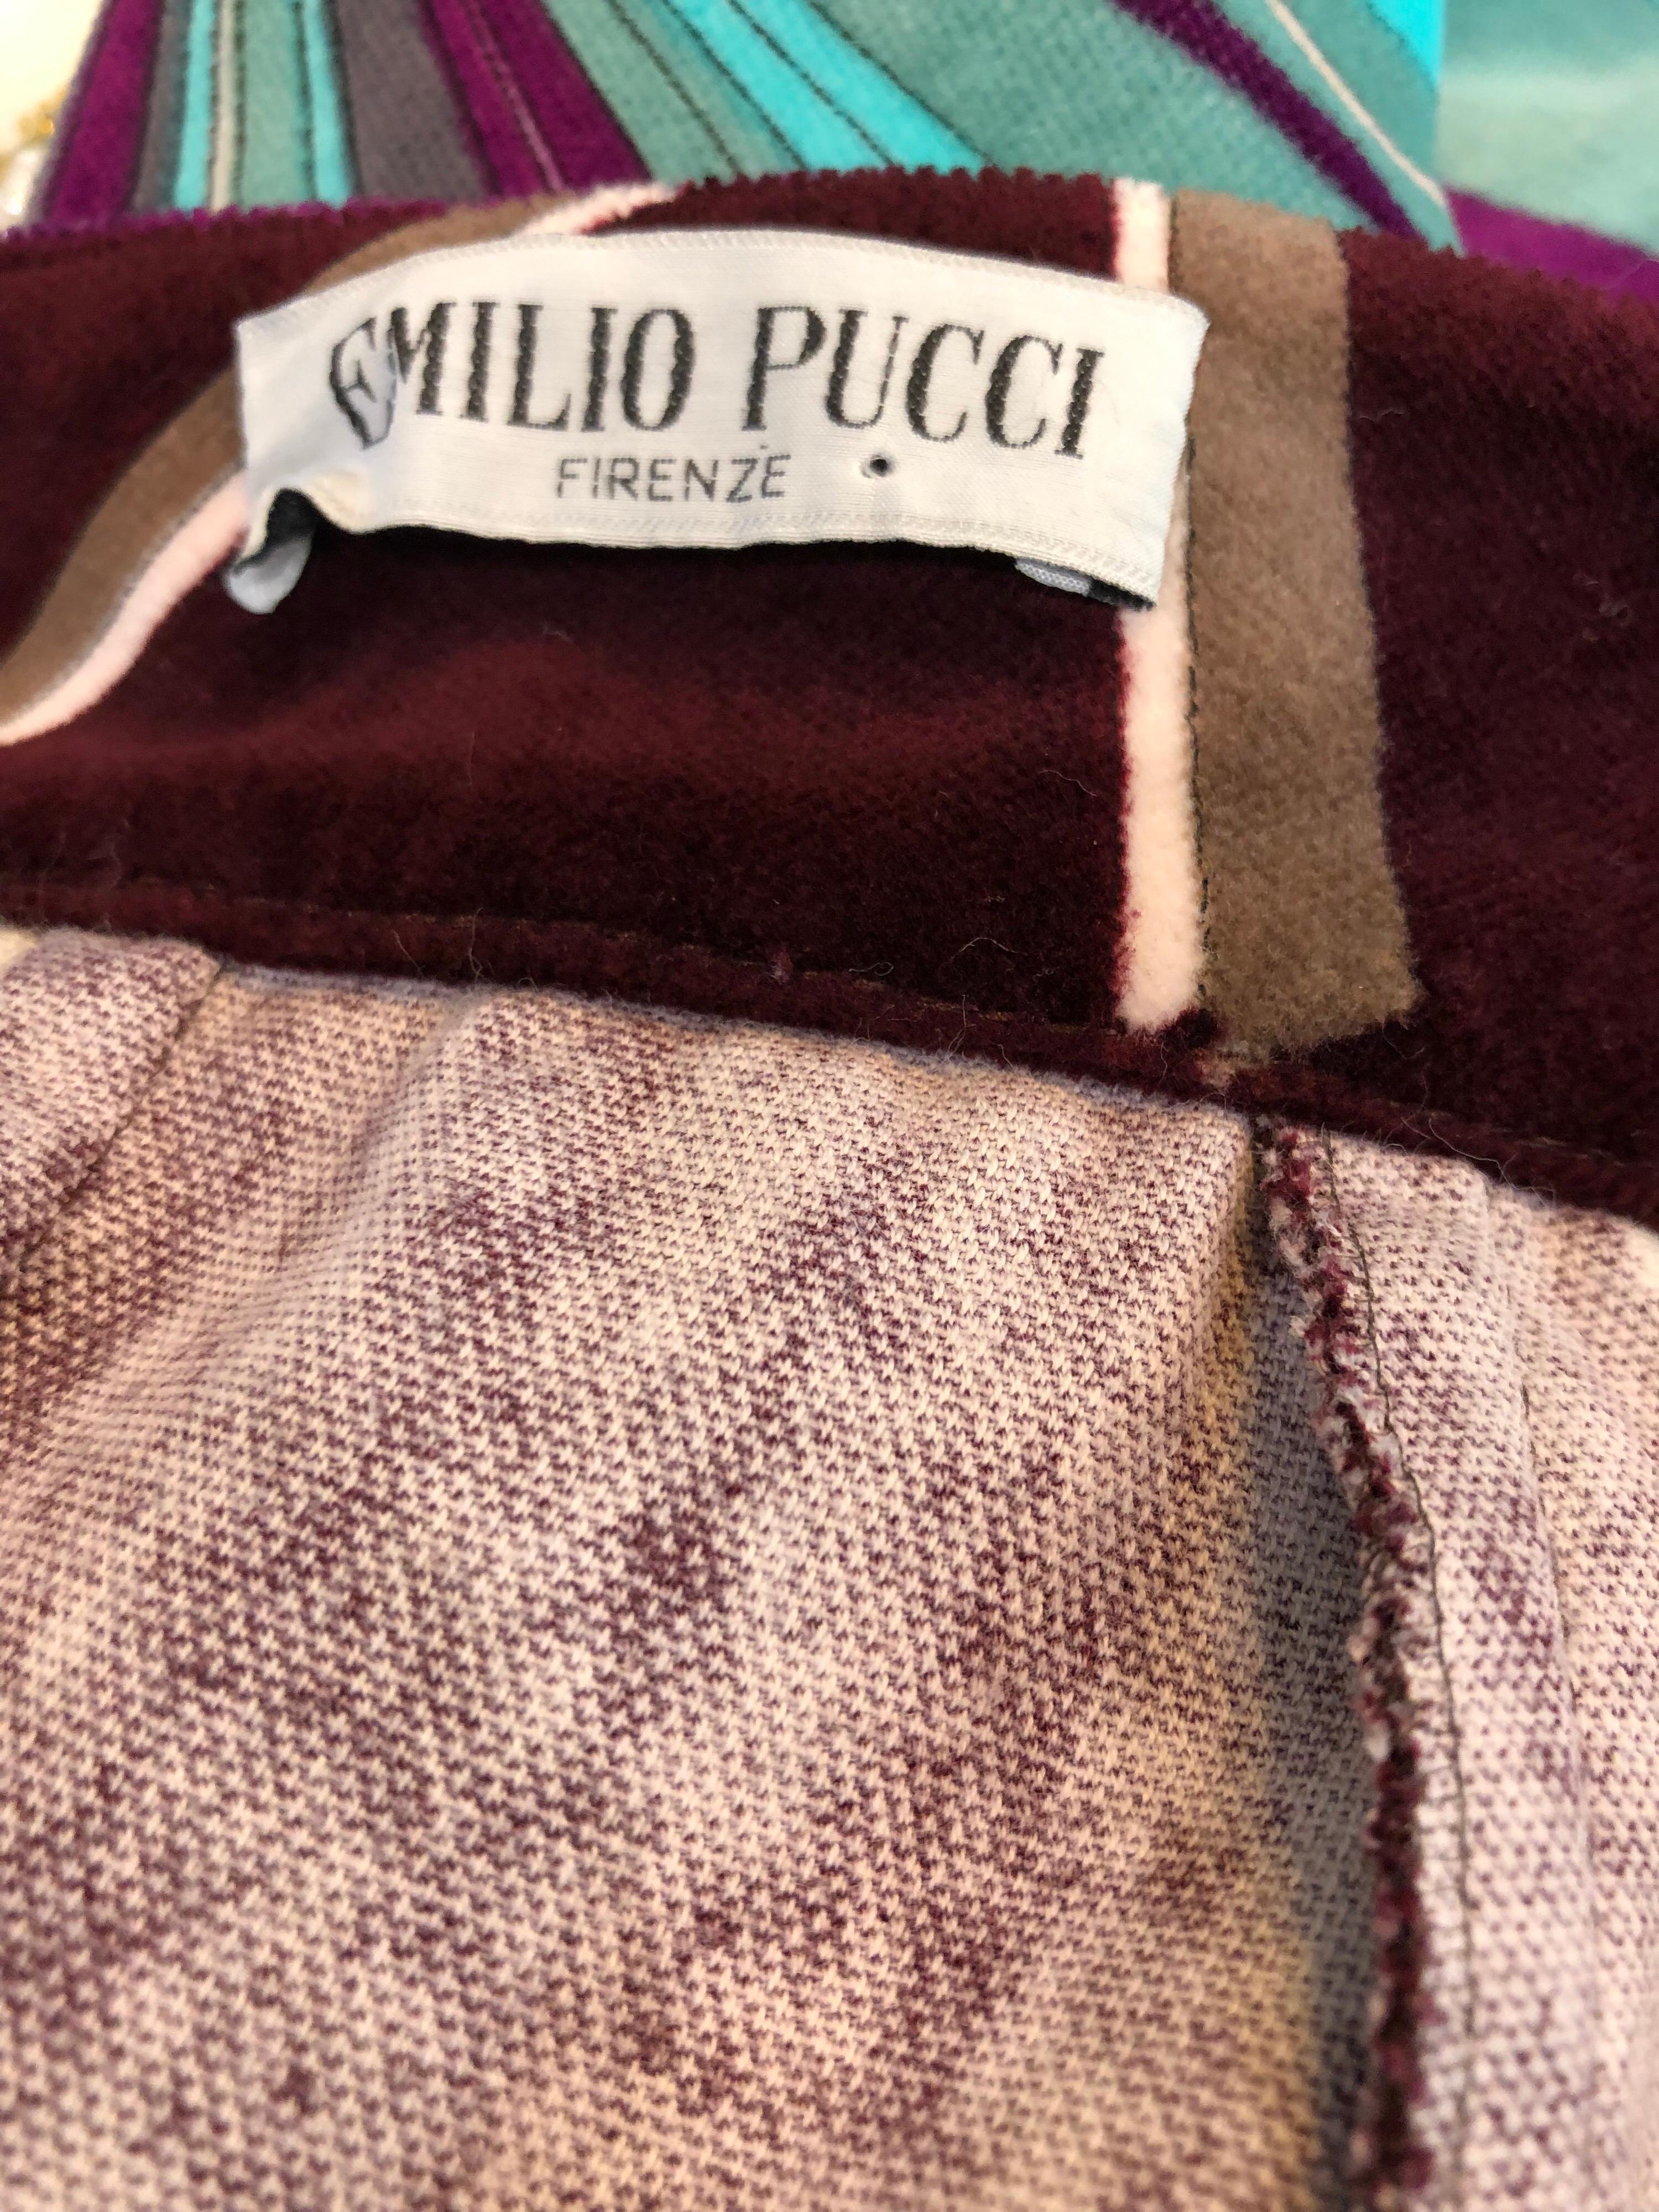 Signature early 90s EMILIO PUCCI vintage high waisted velvet pencil skirt! Features vibrant colors of purple, burgundy, blue, turquoise and brown throughout. Pucci logo signature throughout. Super soft cotton velvet, with a slight stretch. Hidden